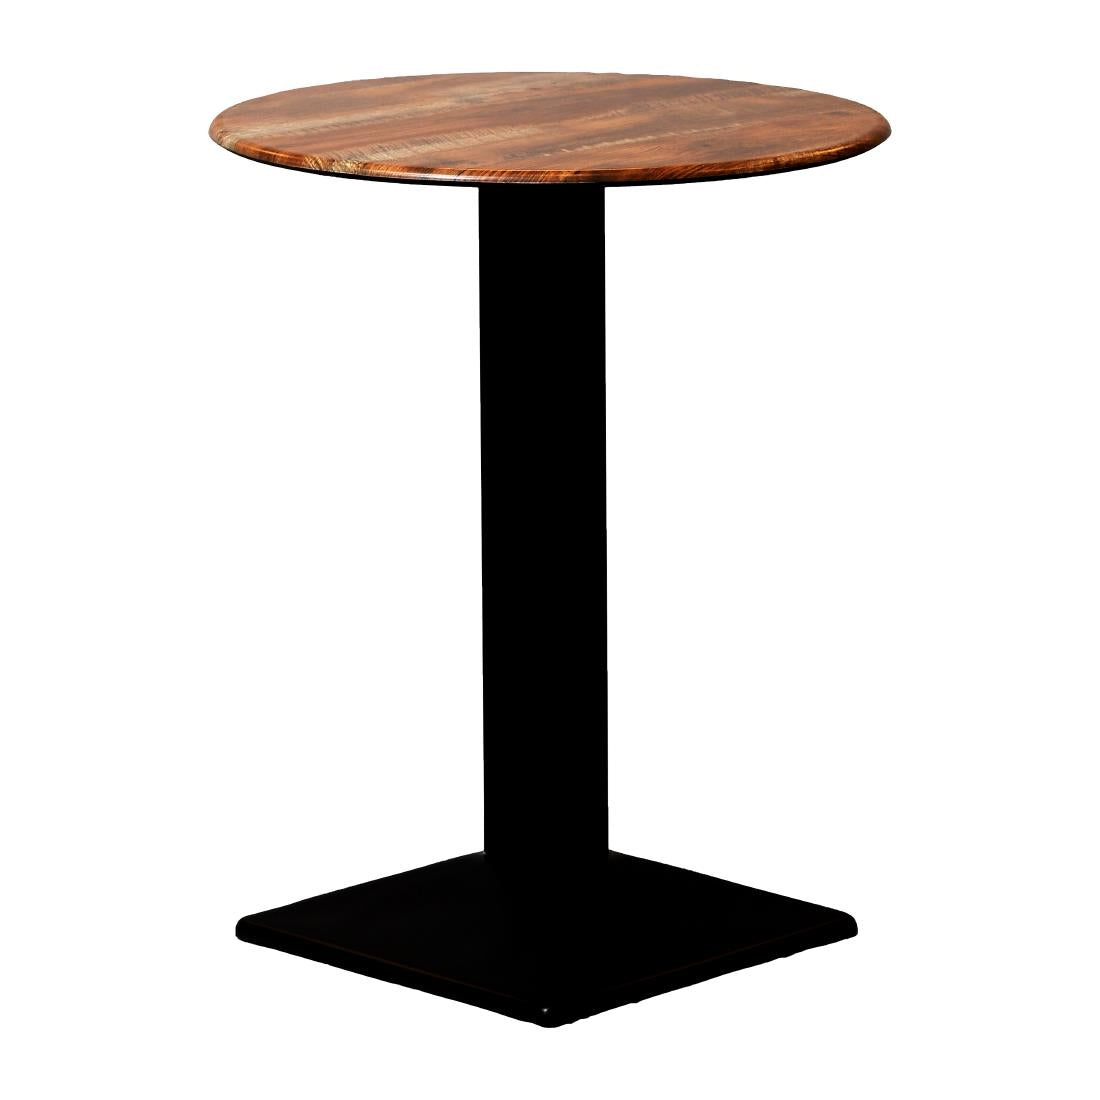 CZ836 Turin Metal Base Round Poseur Table with Laminate Top Planked Oak 600mm JD Catering Equipment Solutions Ltd